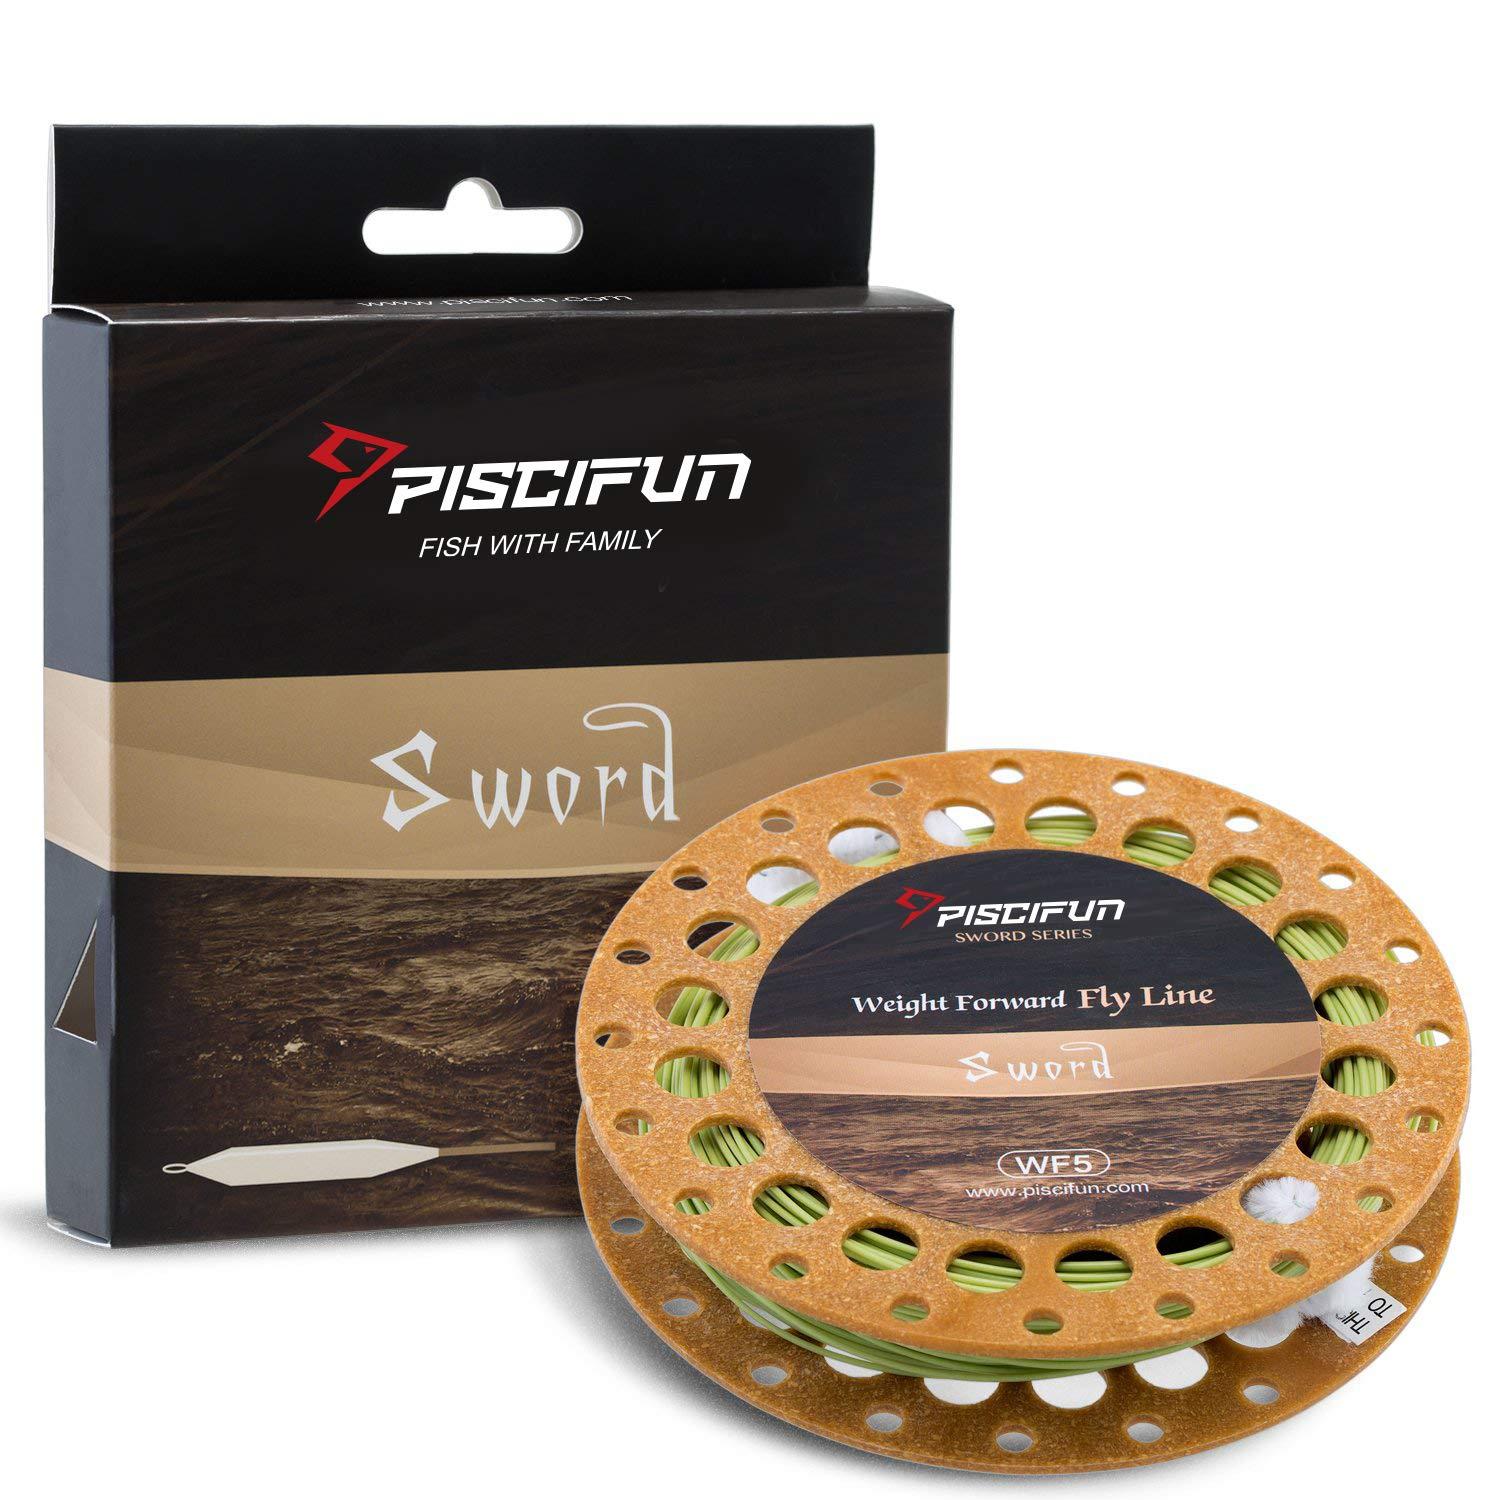 Piscifun Sword Fly Fishing Spare Spools Black - Finish-Tackle